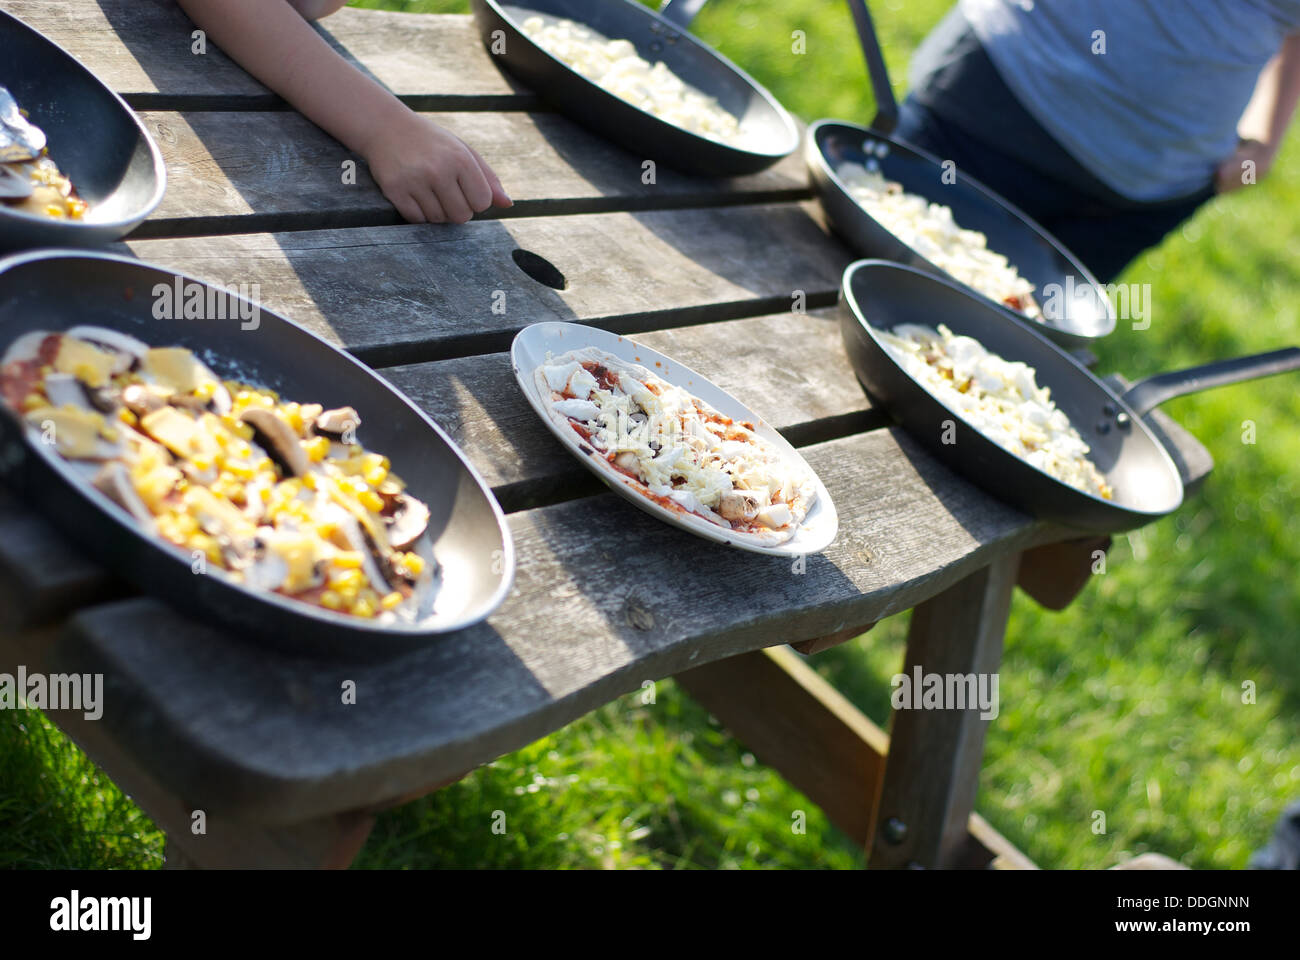 Fresh pizzas waiting to be put into the outdoor oven on a camping holiday Stock Photo